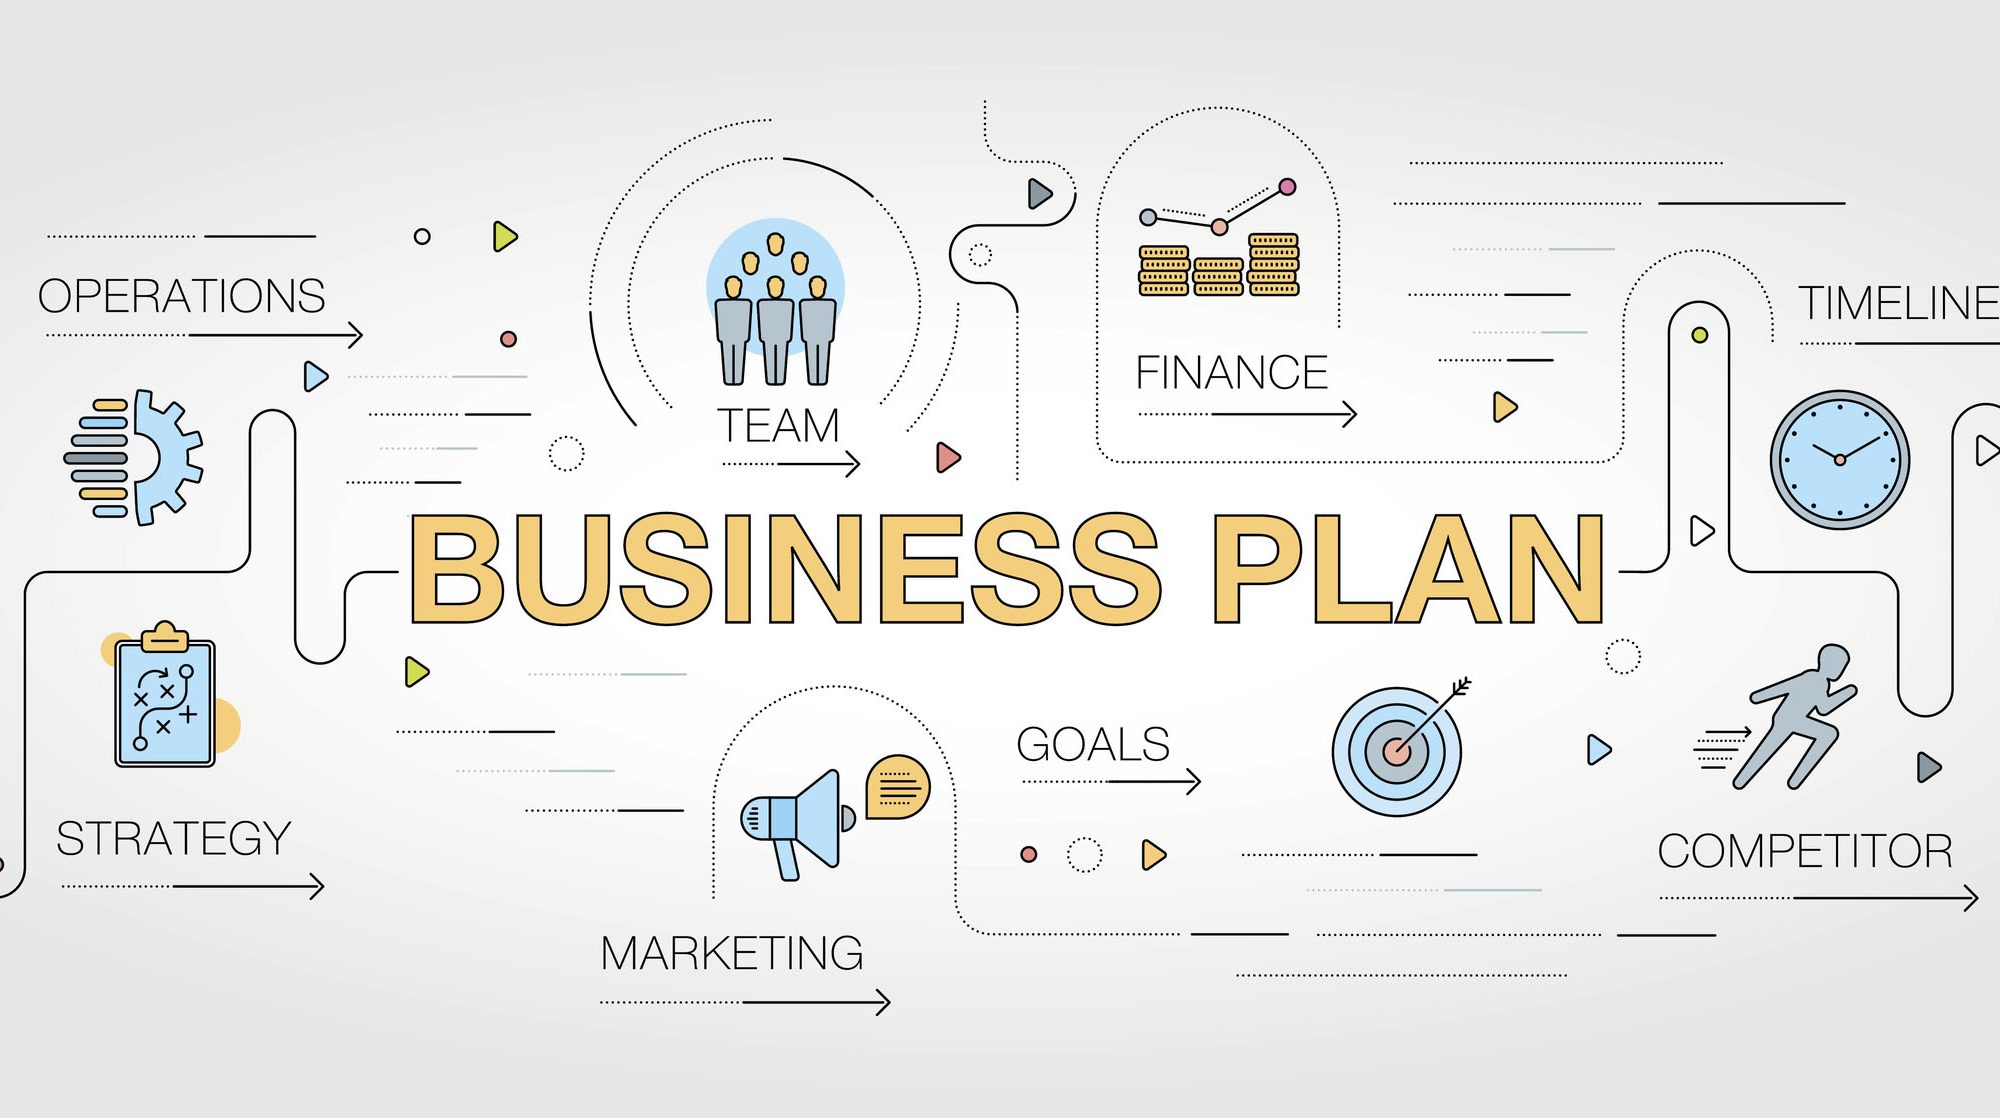 structure business plan